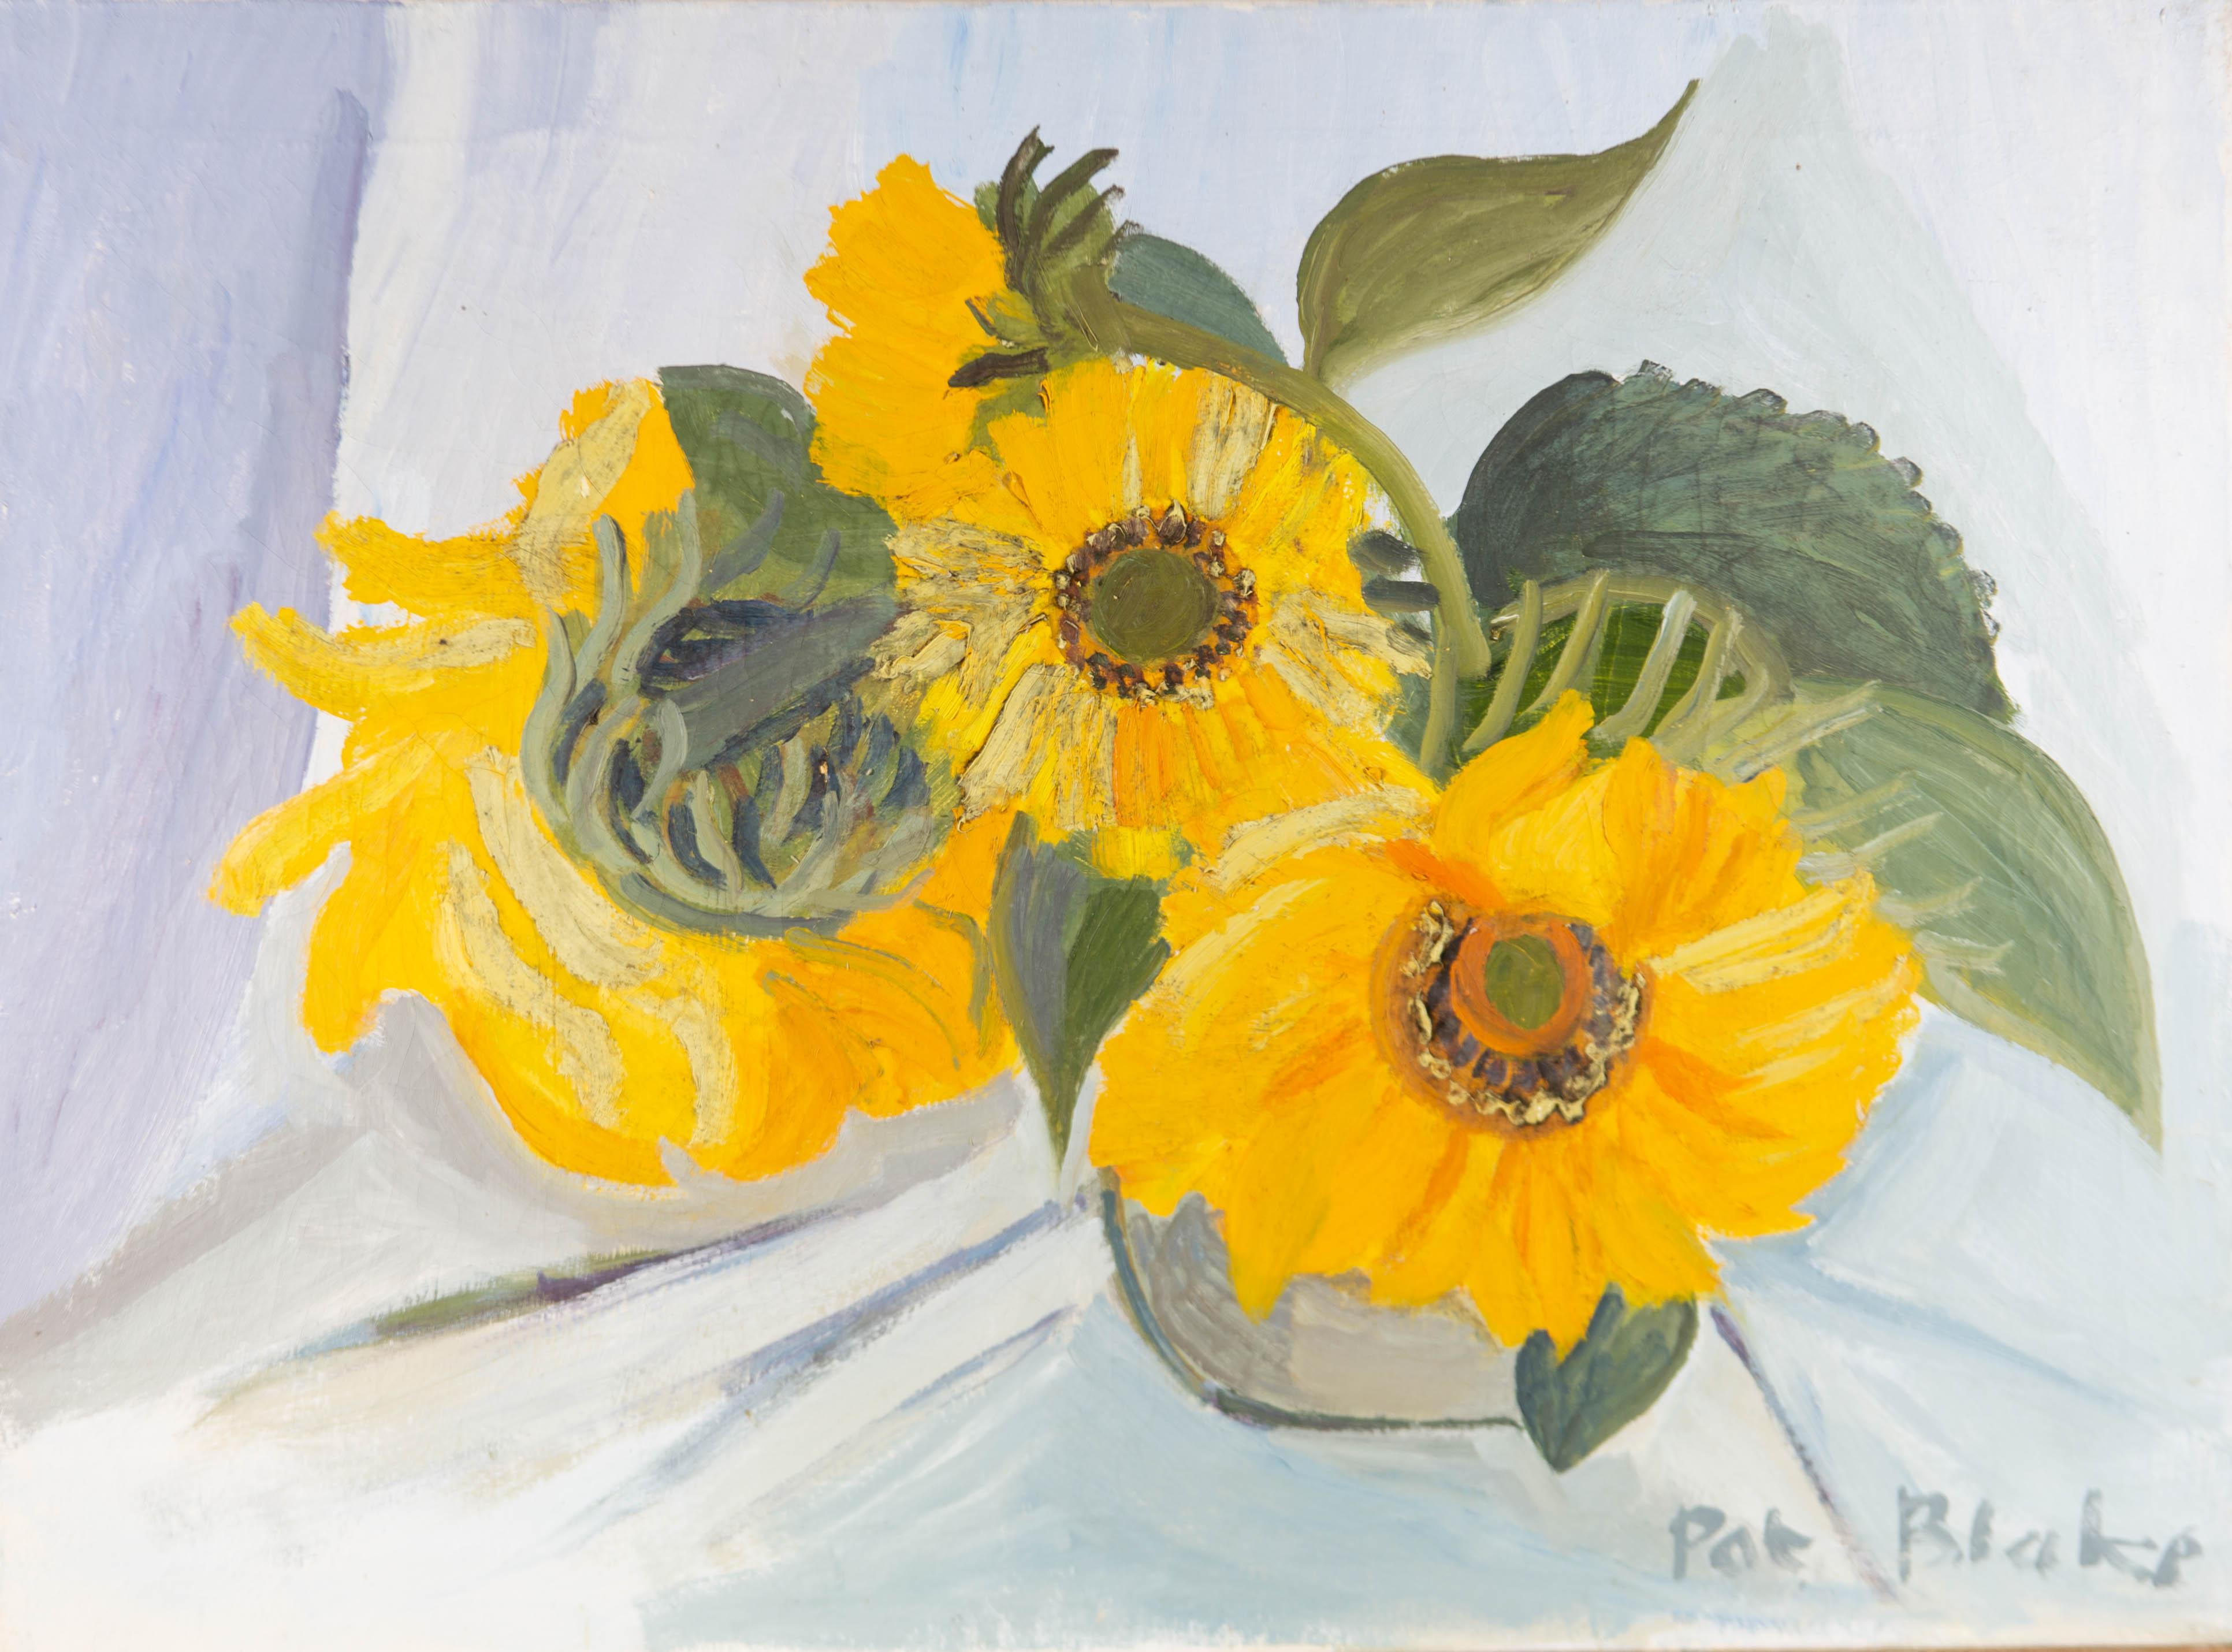 Unknown Still-Life Painting - Pat Blake - 20th Century Oil, Still Life of Sunflowers